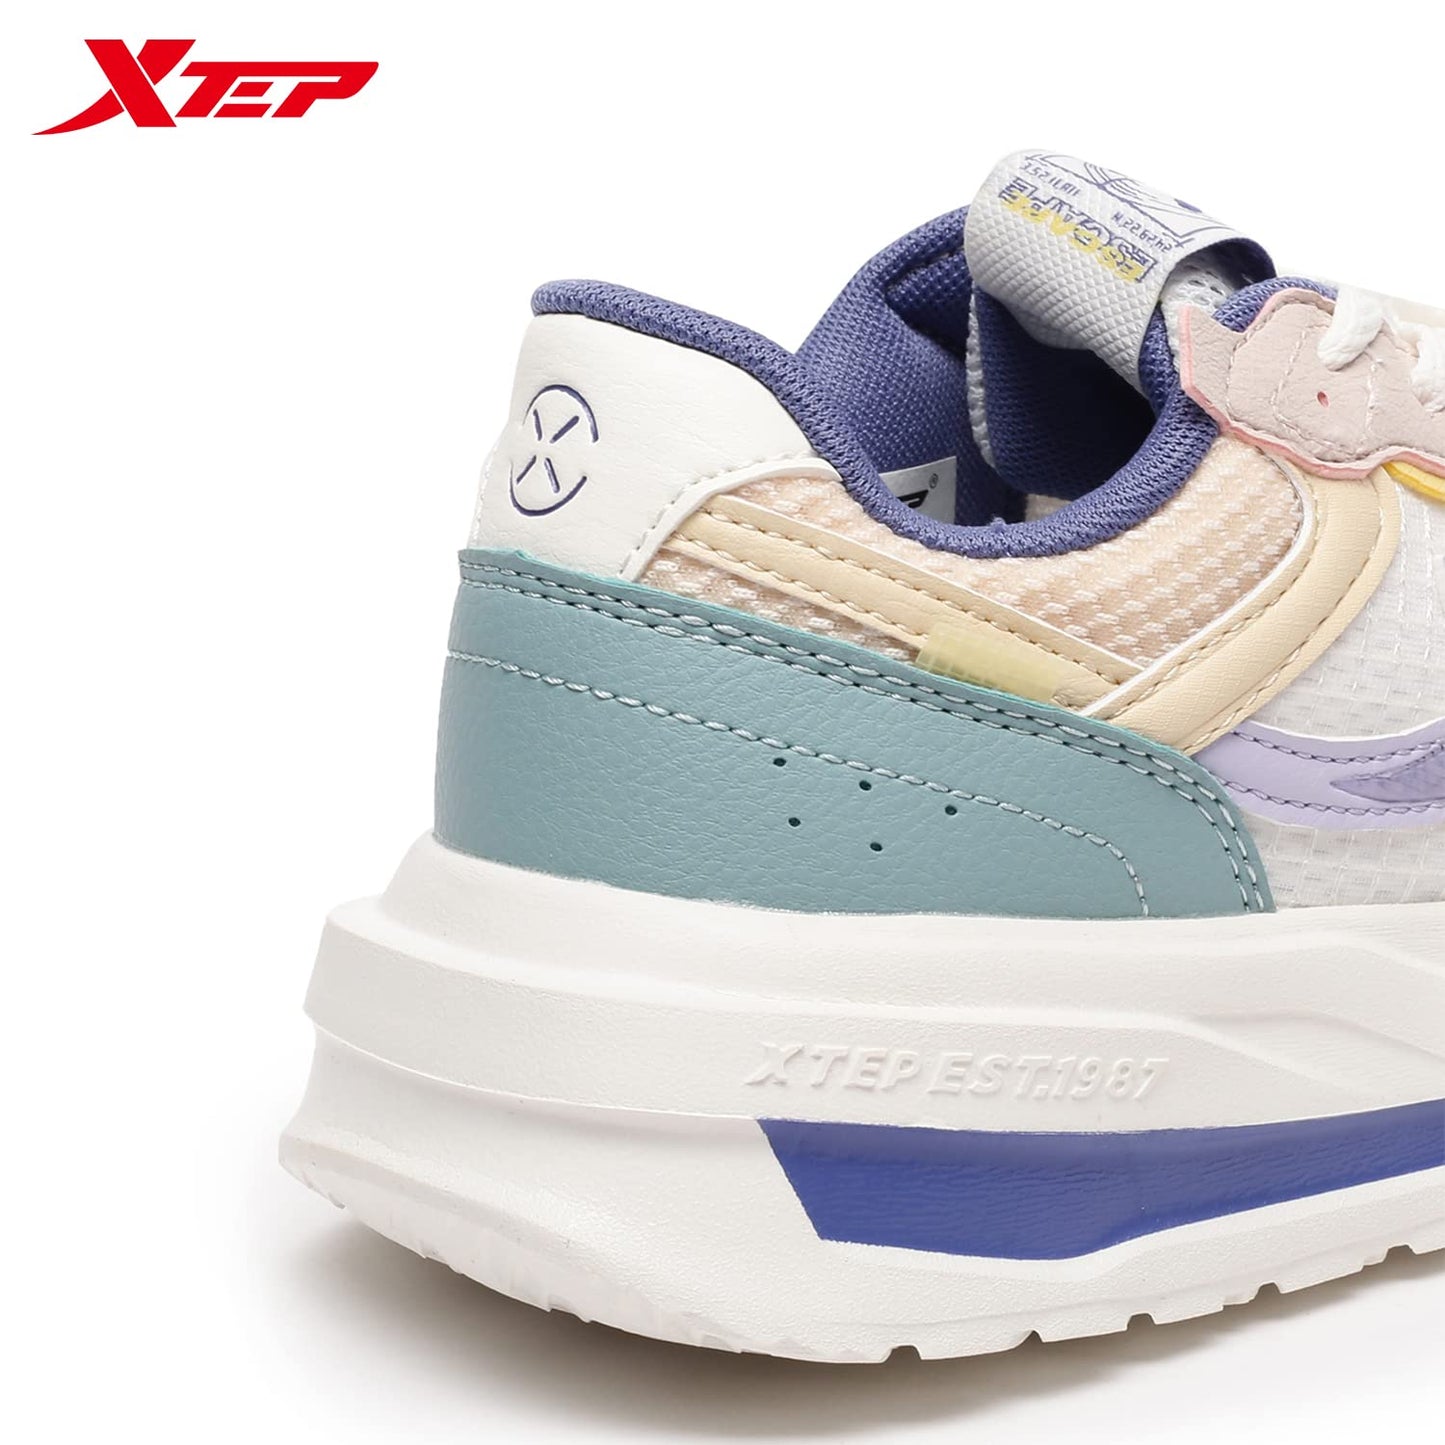 XTEP Women's White Pink Blue Mono Mesh Upper Lightweight Casual Shoes (5.5 UK)